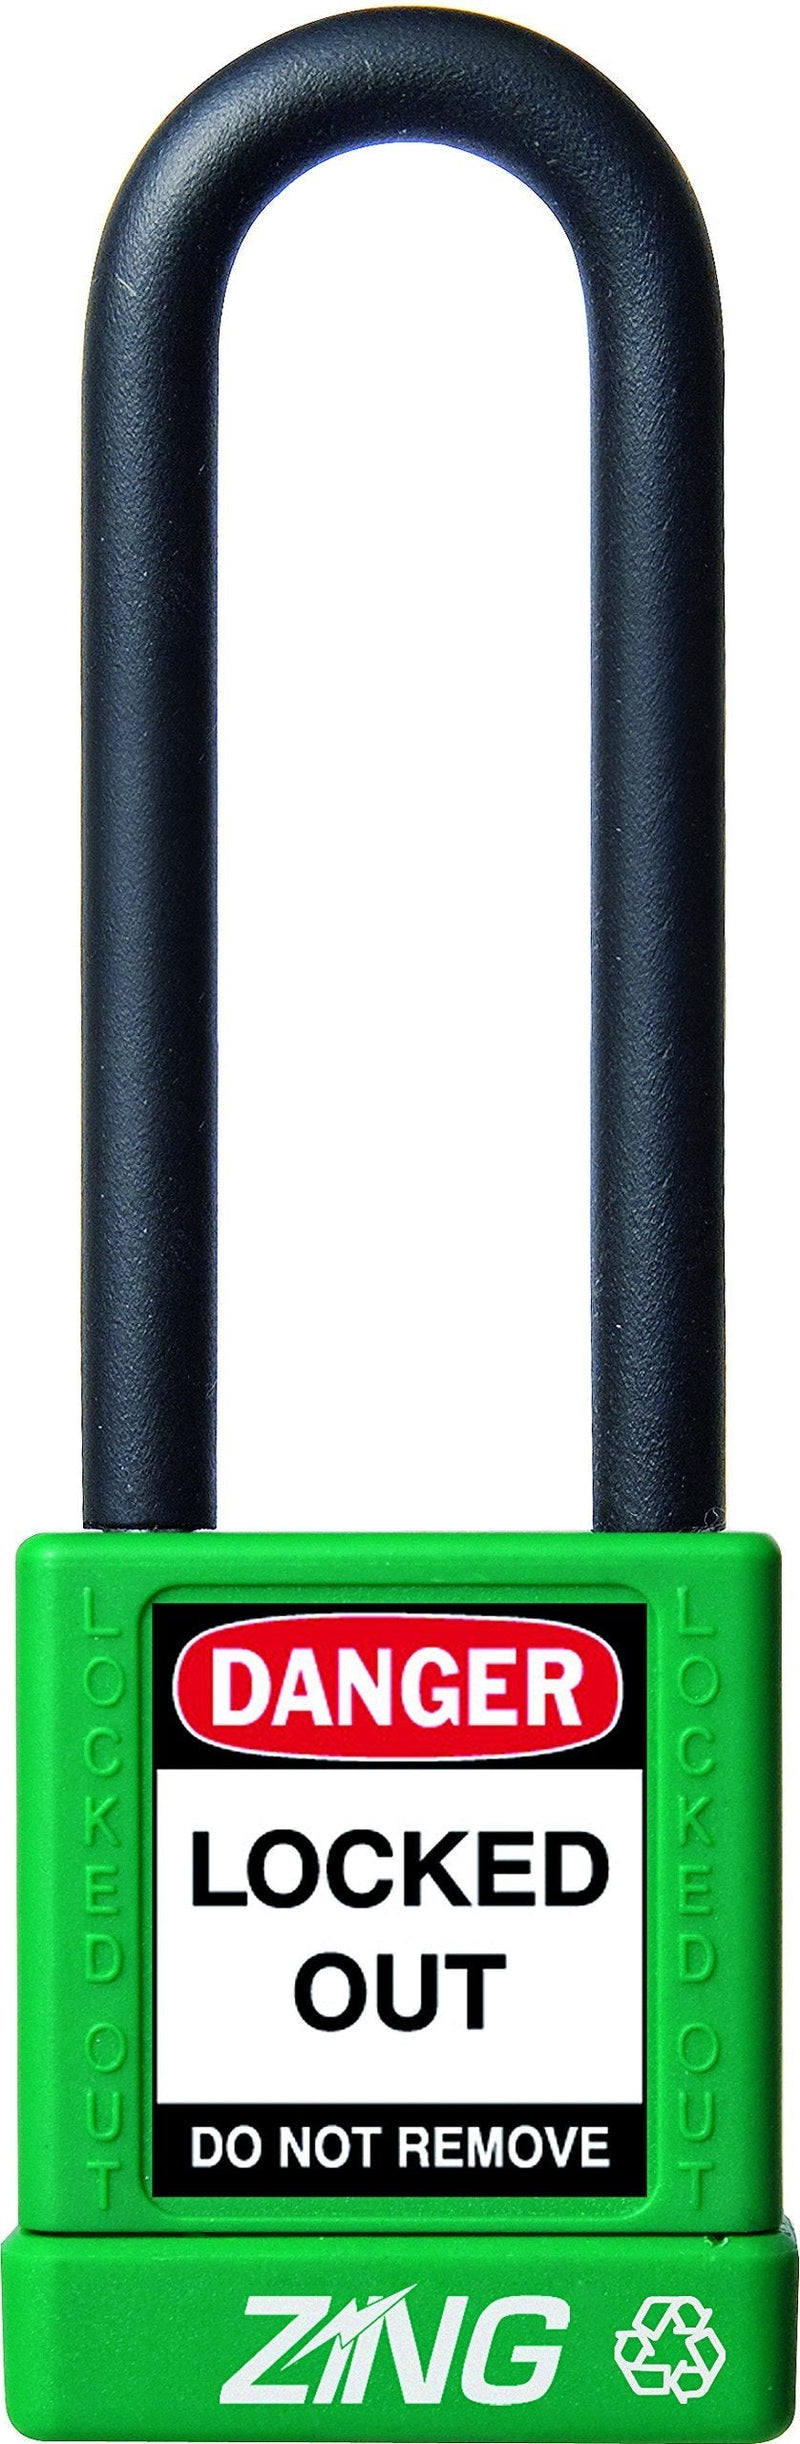 ZING 7050 RecycLock Safety Padlock, Keyed Different, 3" Shackle, 1-3/4" Body, Green